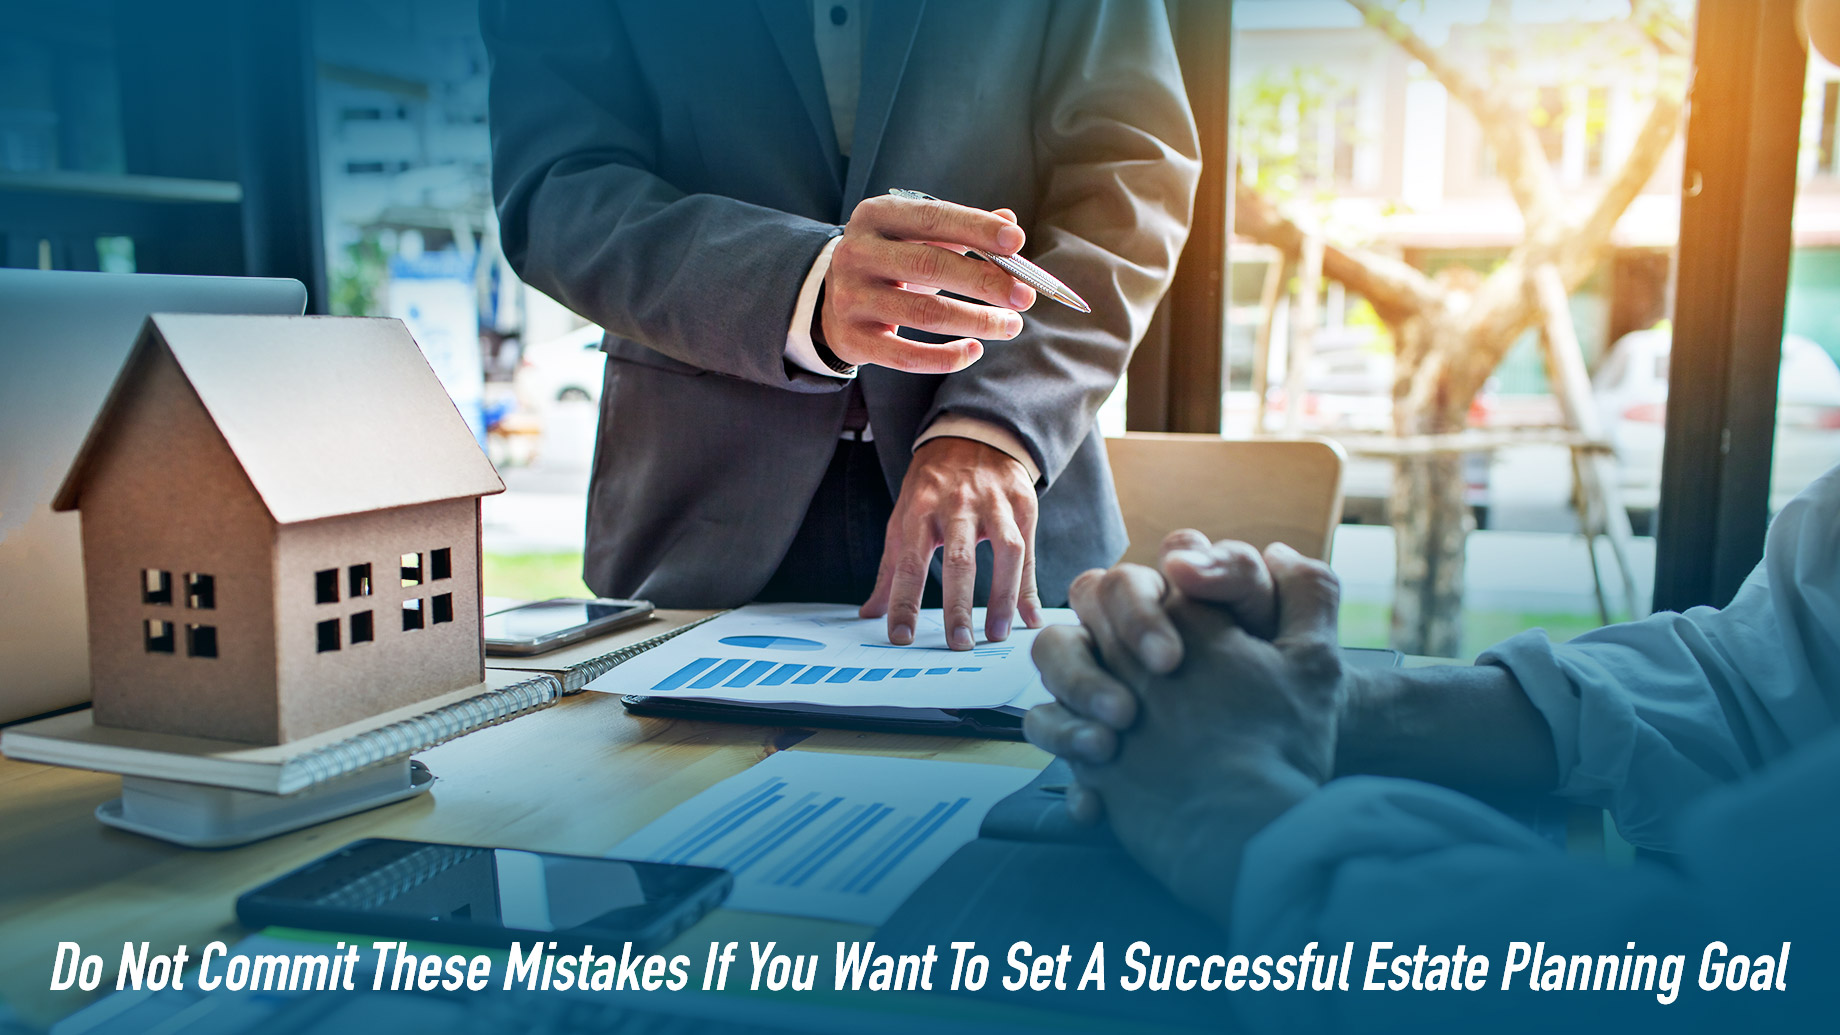 Do Not Commit These Mistakes If You Want To Set A Successful Estate Planning Goal